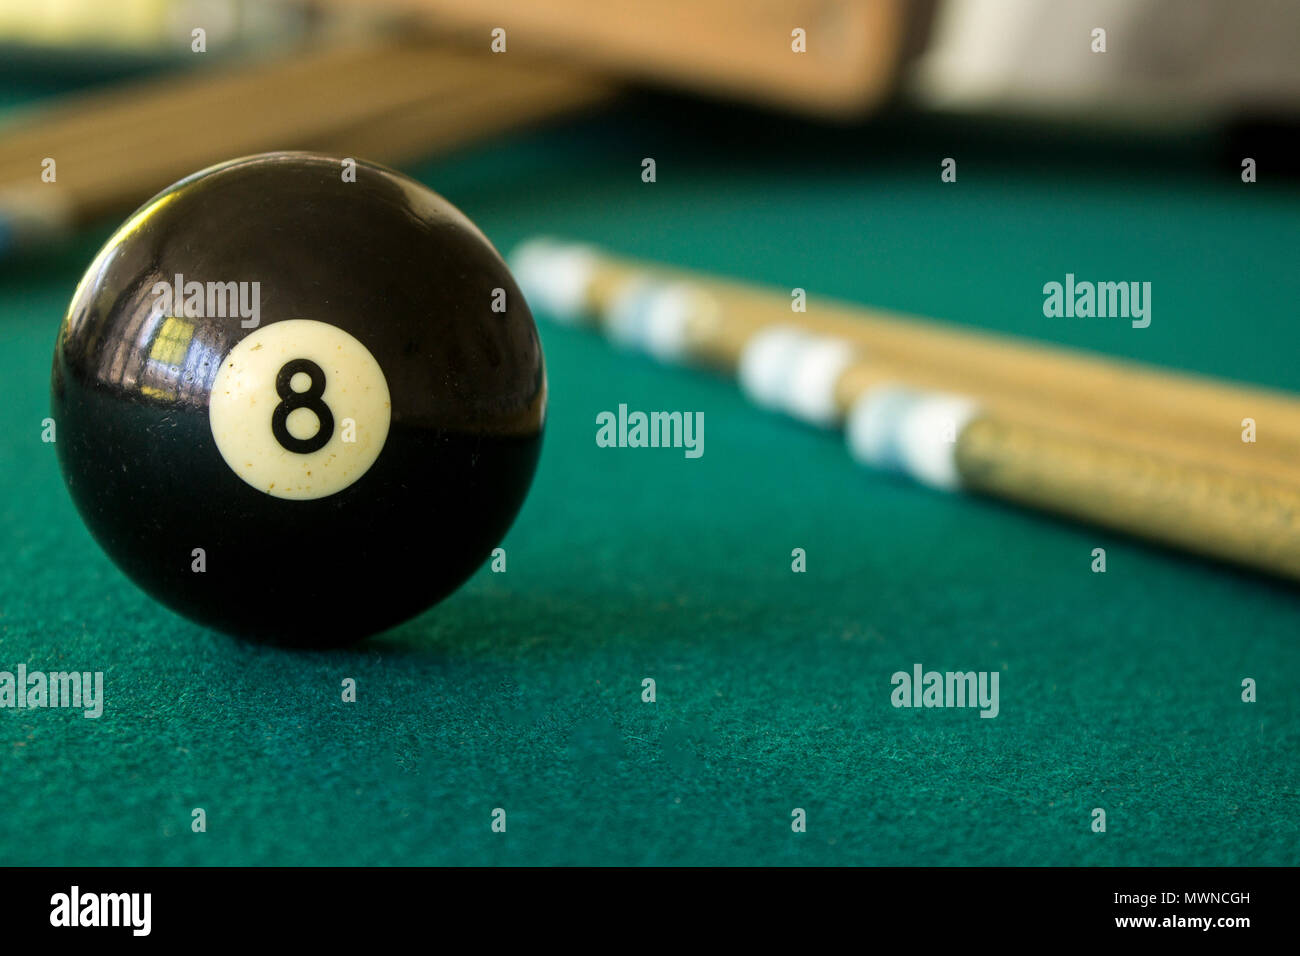 Eight black ball on a green table with cue sticks Stock Photo